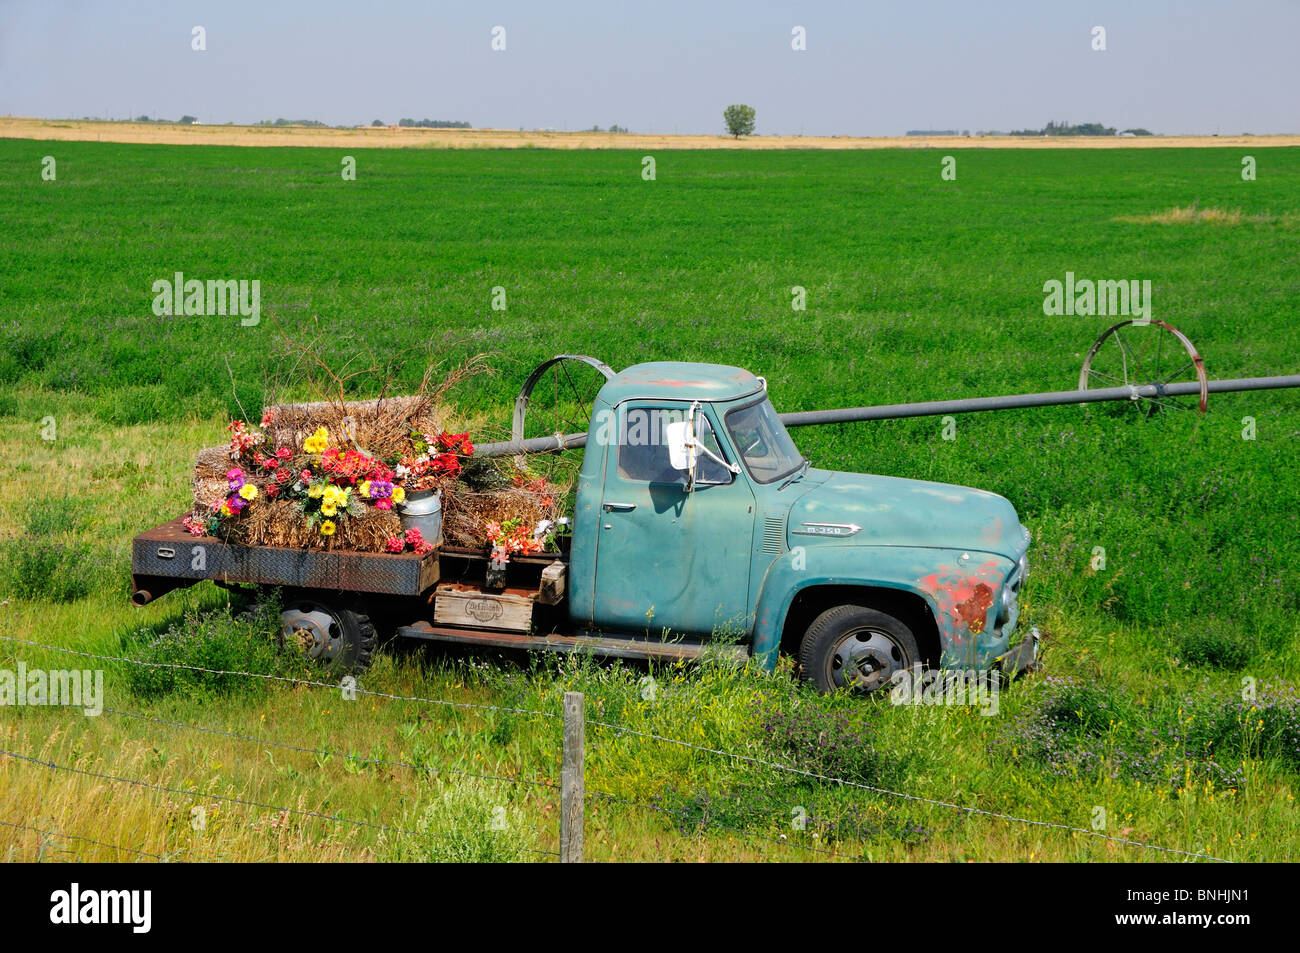 Canada Flowers Old Pickup Truck near Brooks Alberta province wreck decoration decorated rural farming agriculture car vehicle Stock Photo